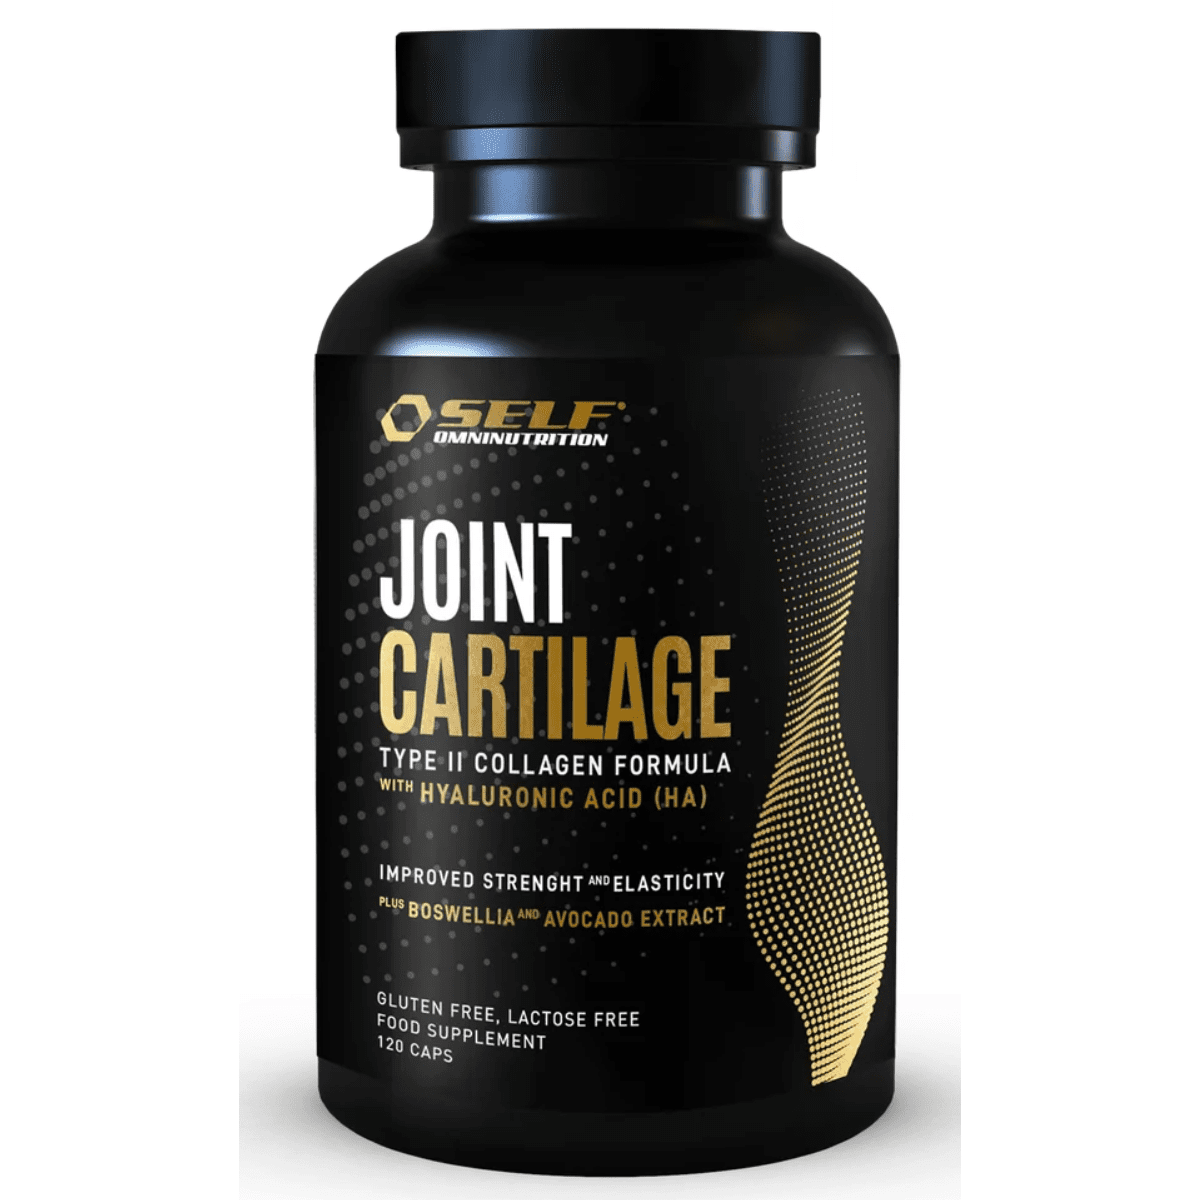 Self Omninutrition Joint cartilage